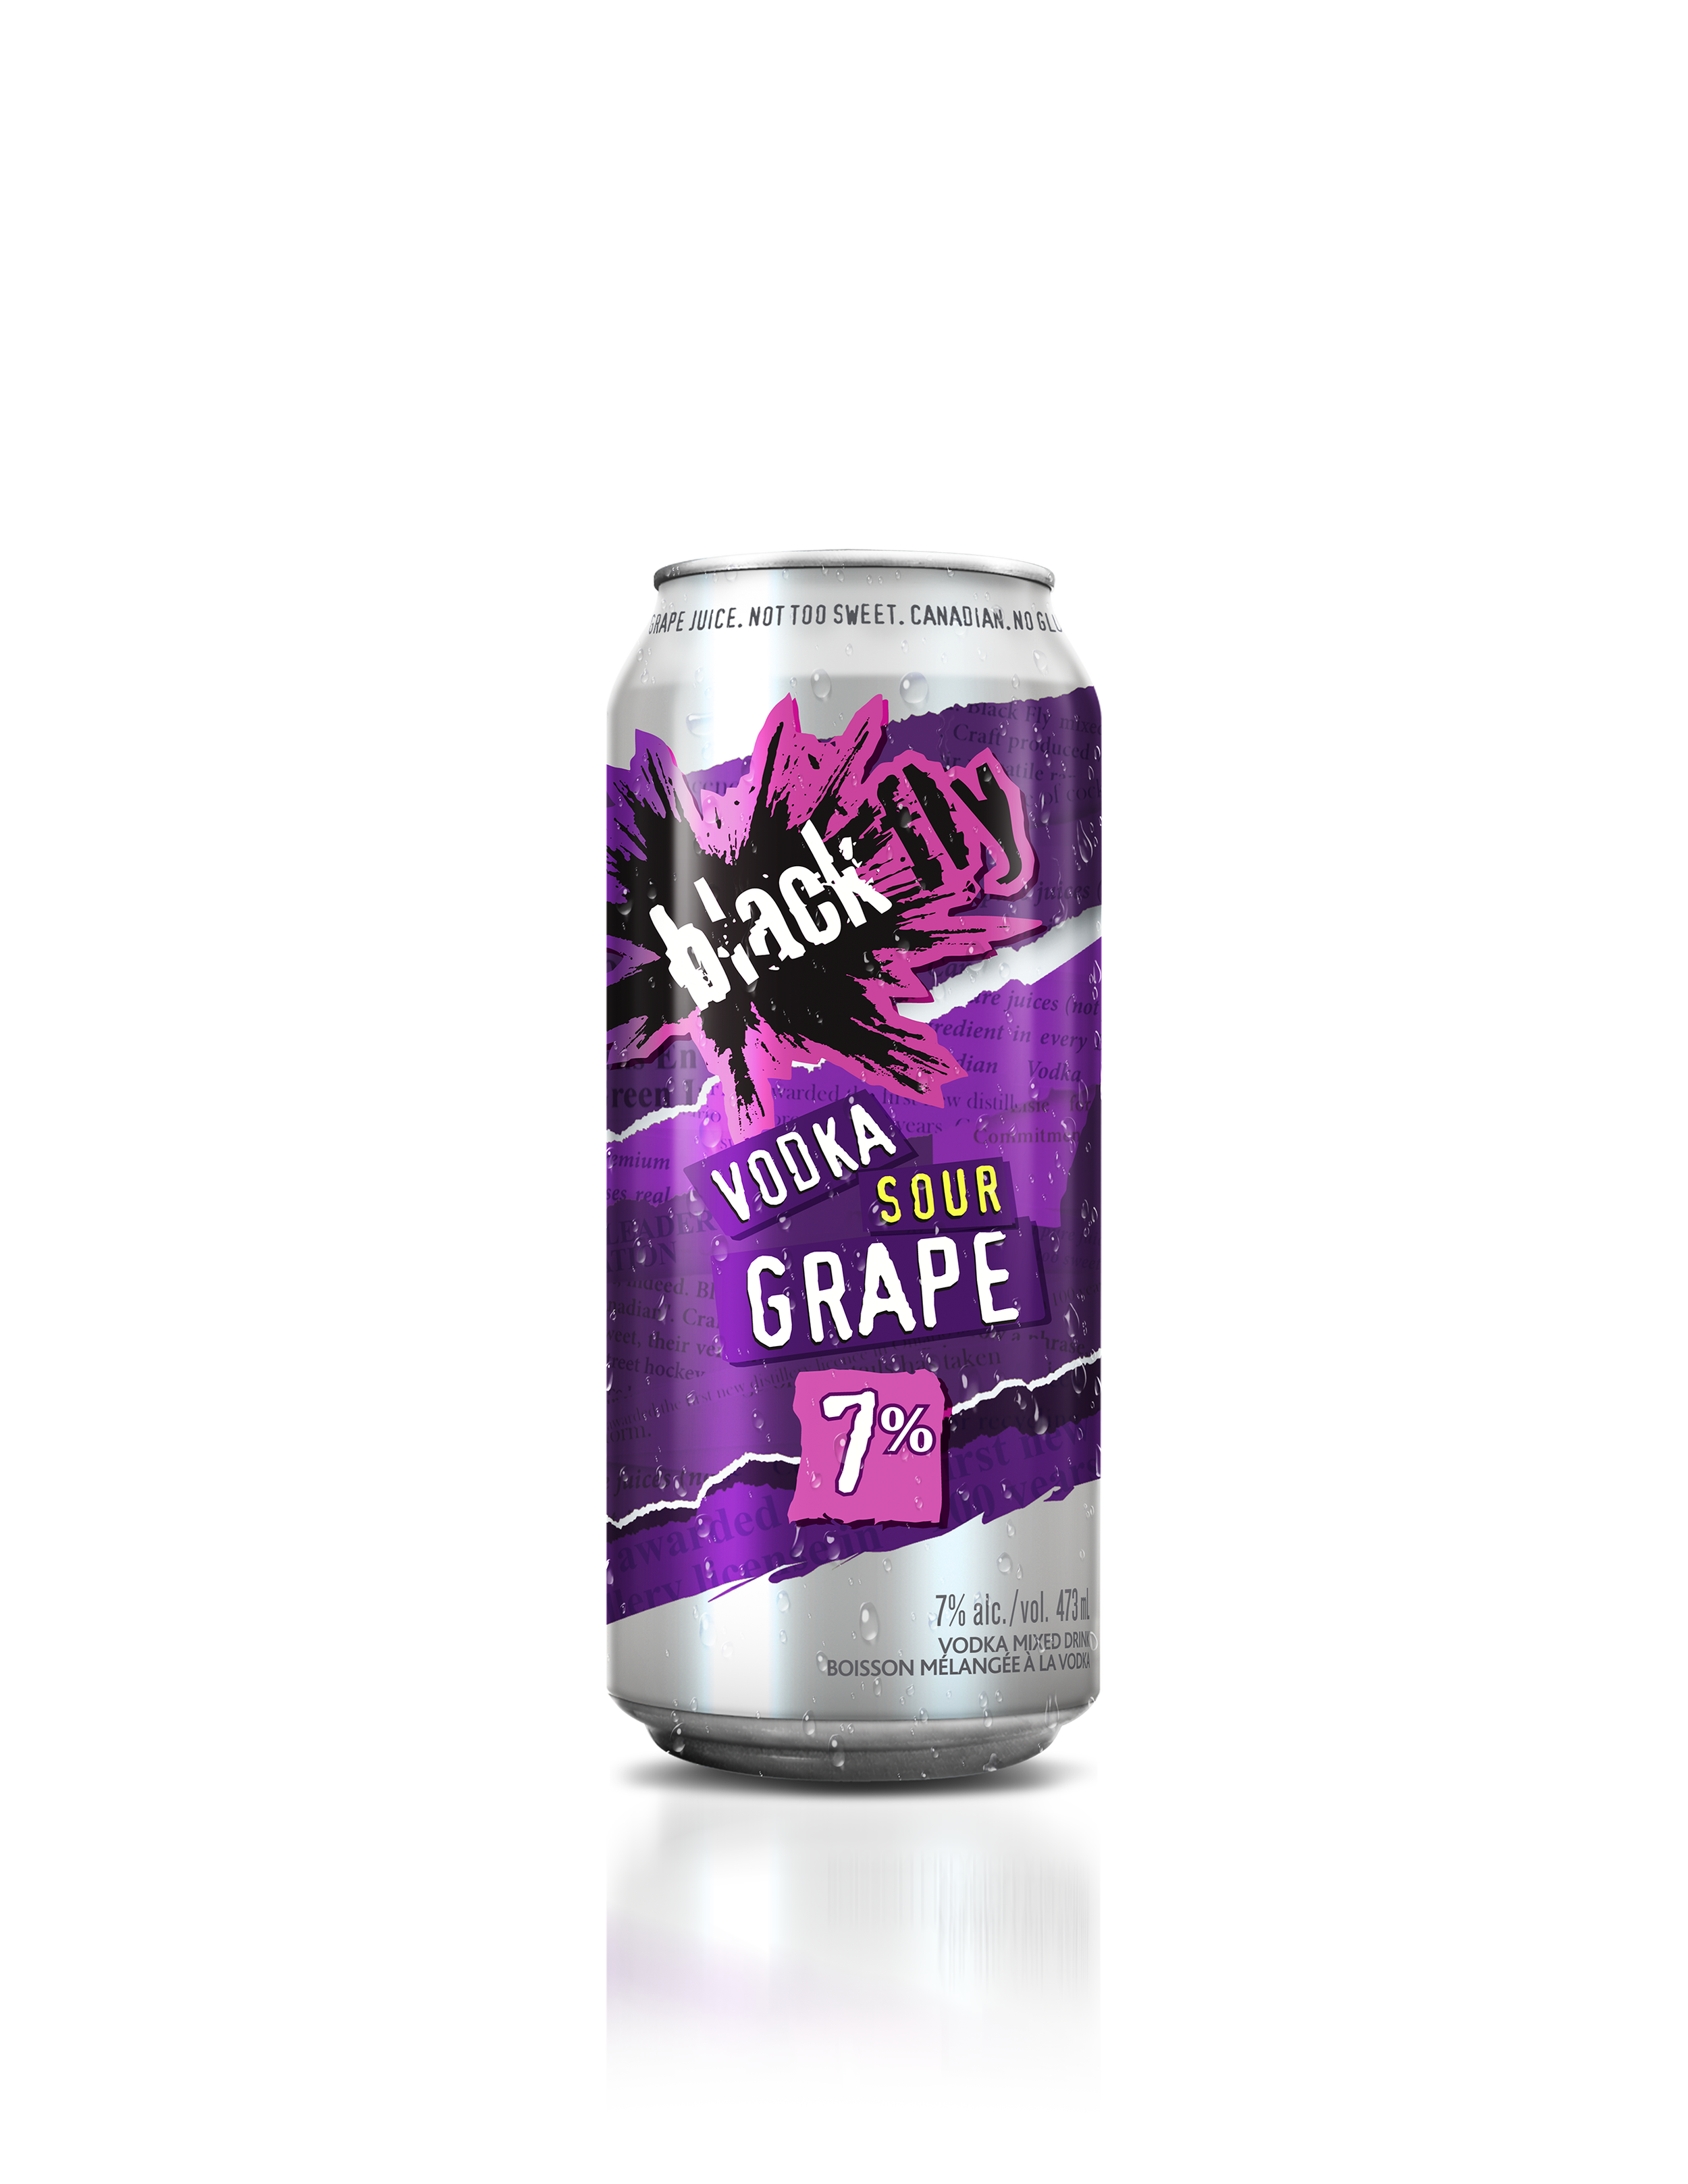 BFB_Microsite3_Product_CrushedGrape.png